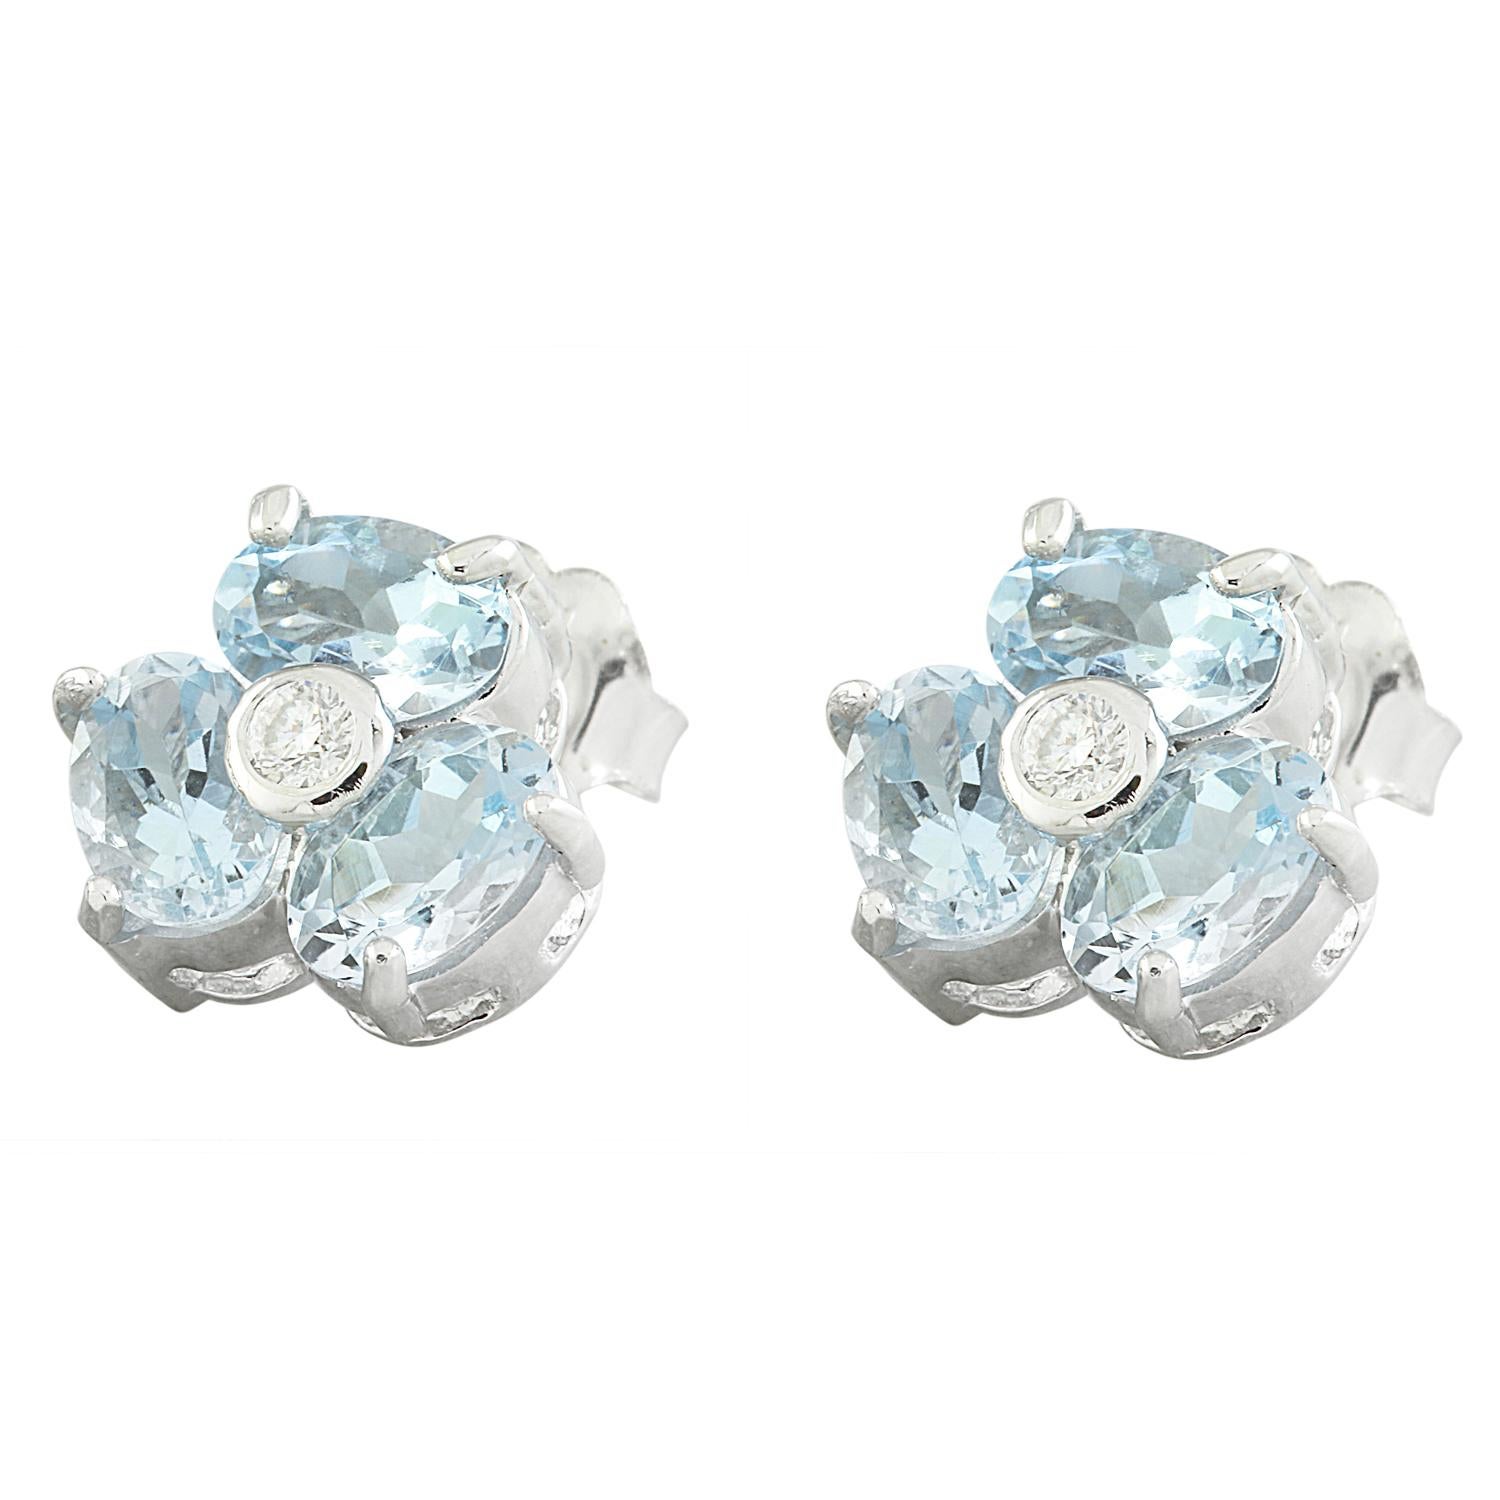 Indulge in the ethereal beauty of these captivating Natural Aquamarine Diamond Earrings, exquisitely crafted in luxurious 14 Karat White Gold. A harmonious fusion of elegance and sophistication. Earring features a dazzling 2.51 carat